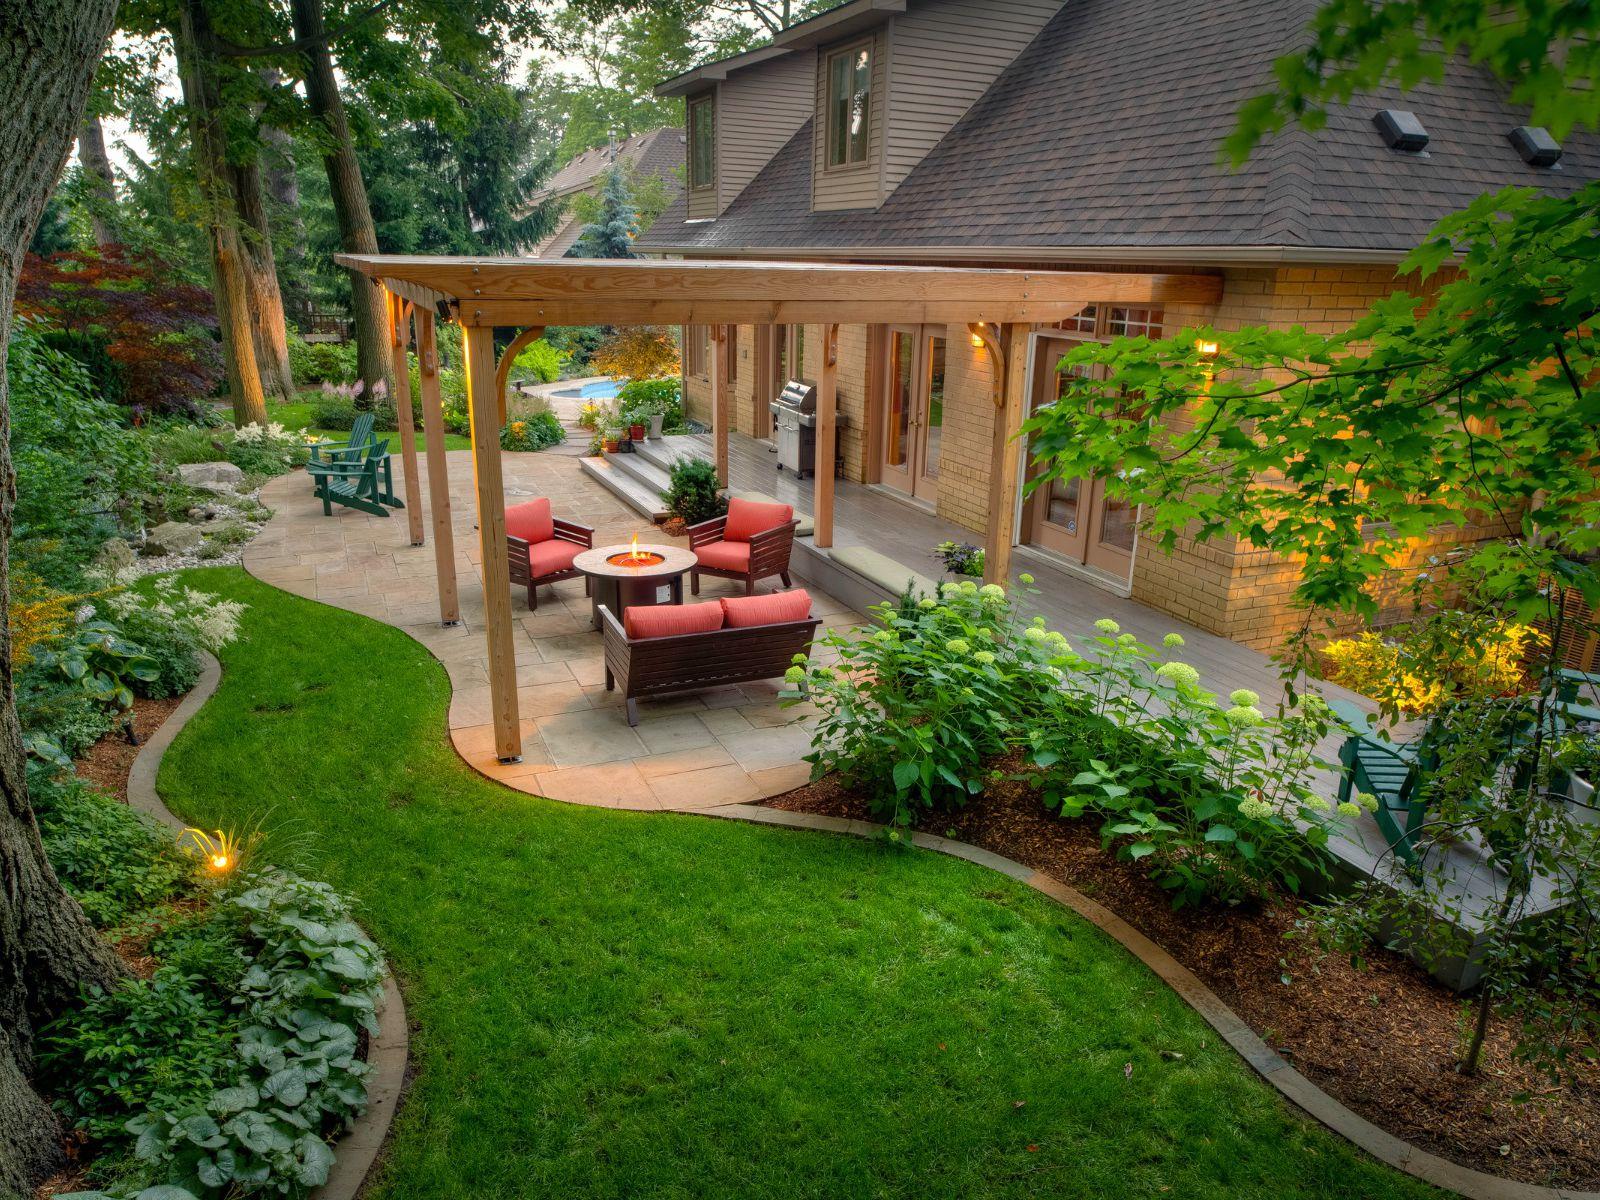 Landscaping Concepts Constructed Around Decks